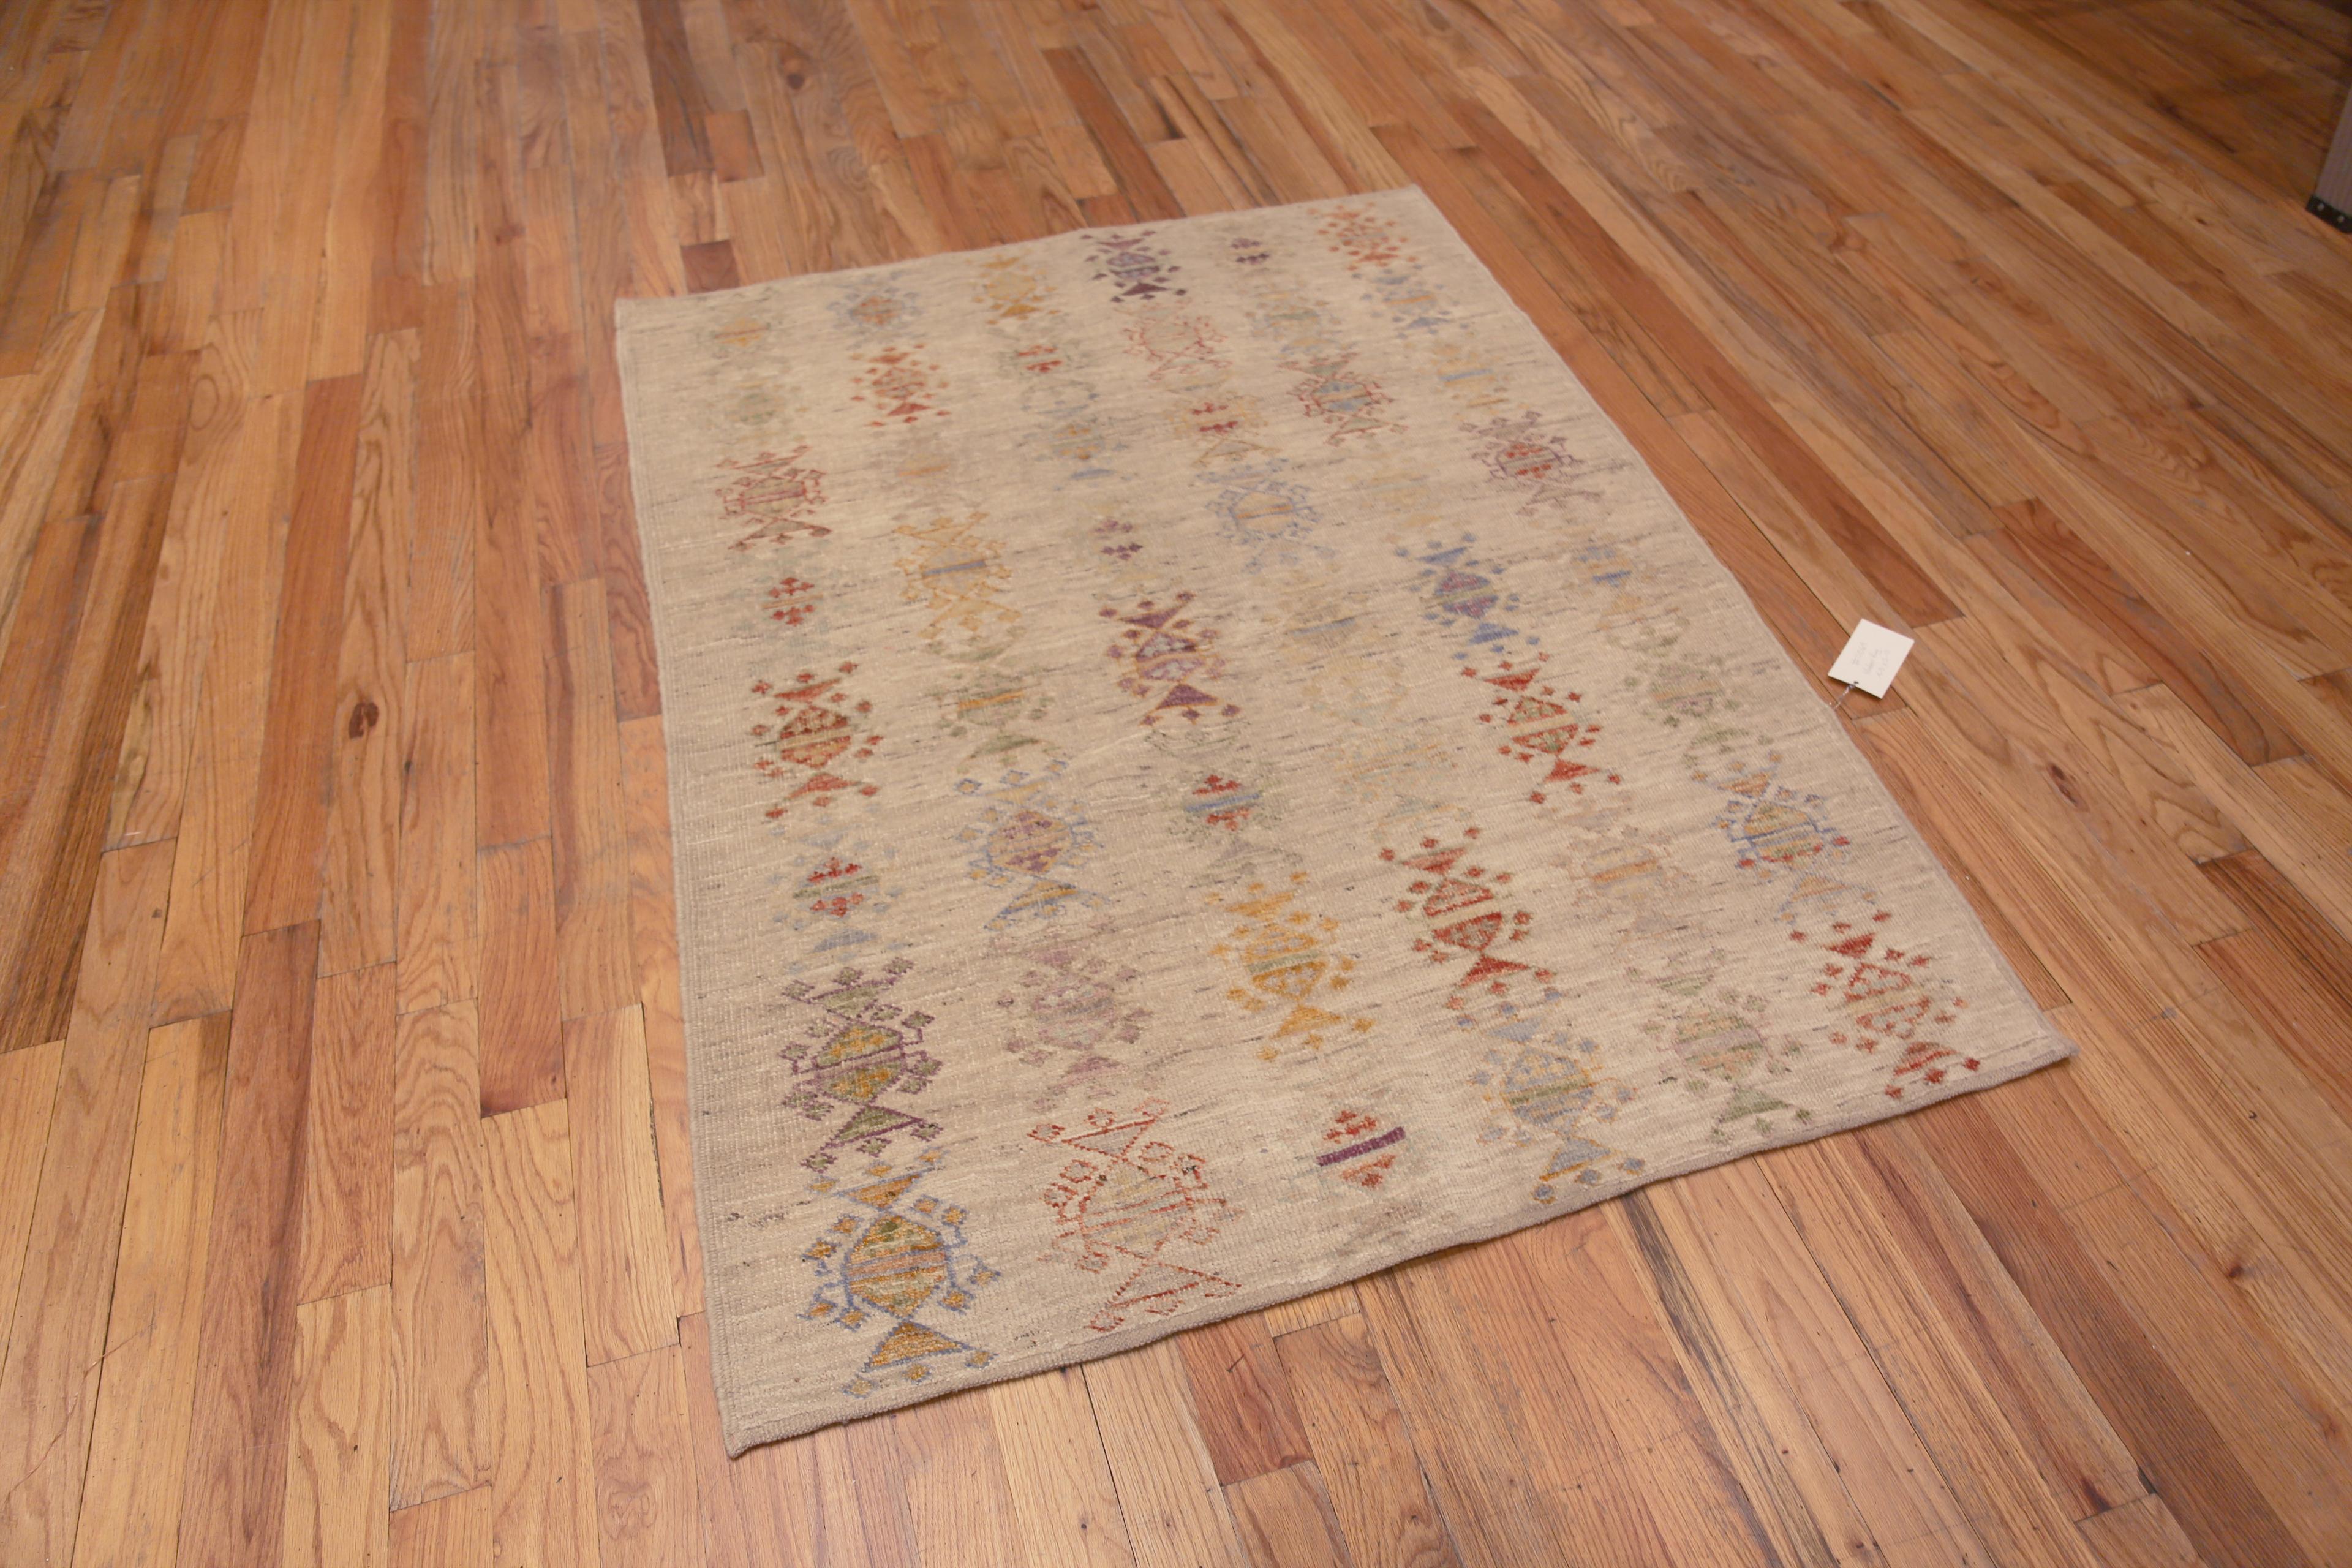 Gorgeous Small Tribal Modern Contemporary Rustic Area Rug, Pays d'origine : Asie centrale, Circa date : Tapis modernes